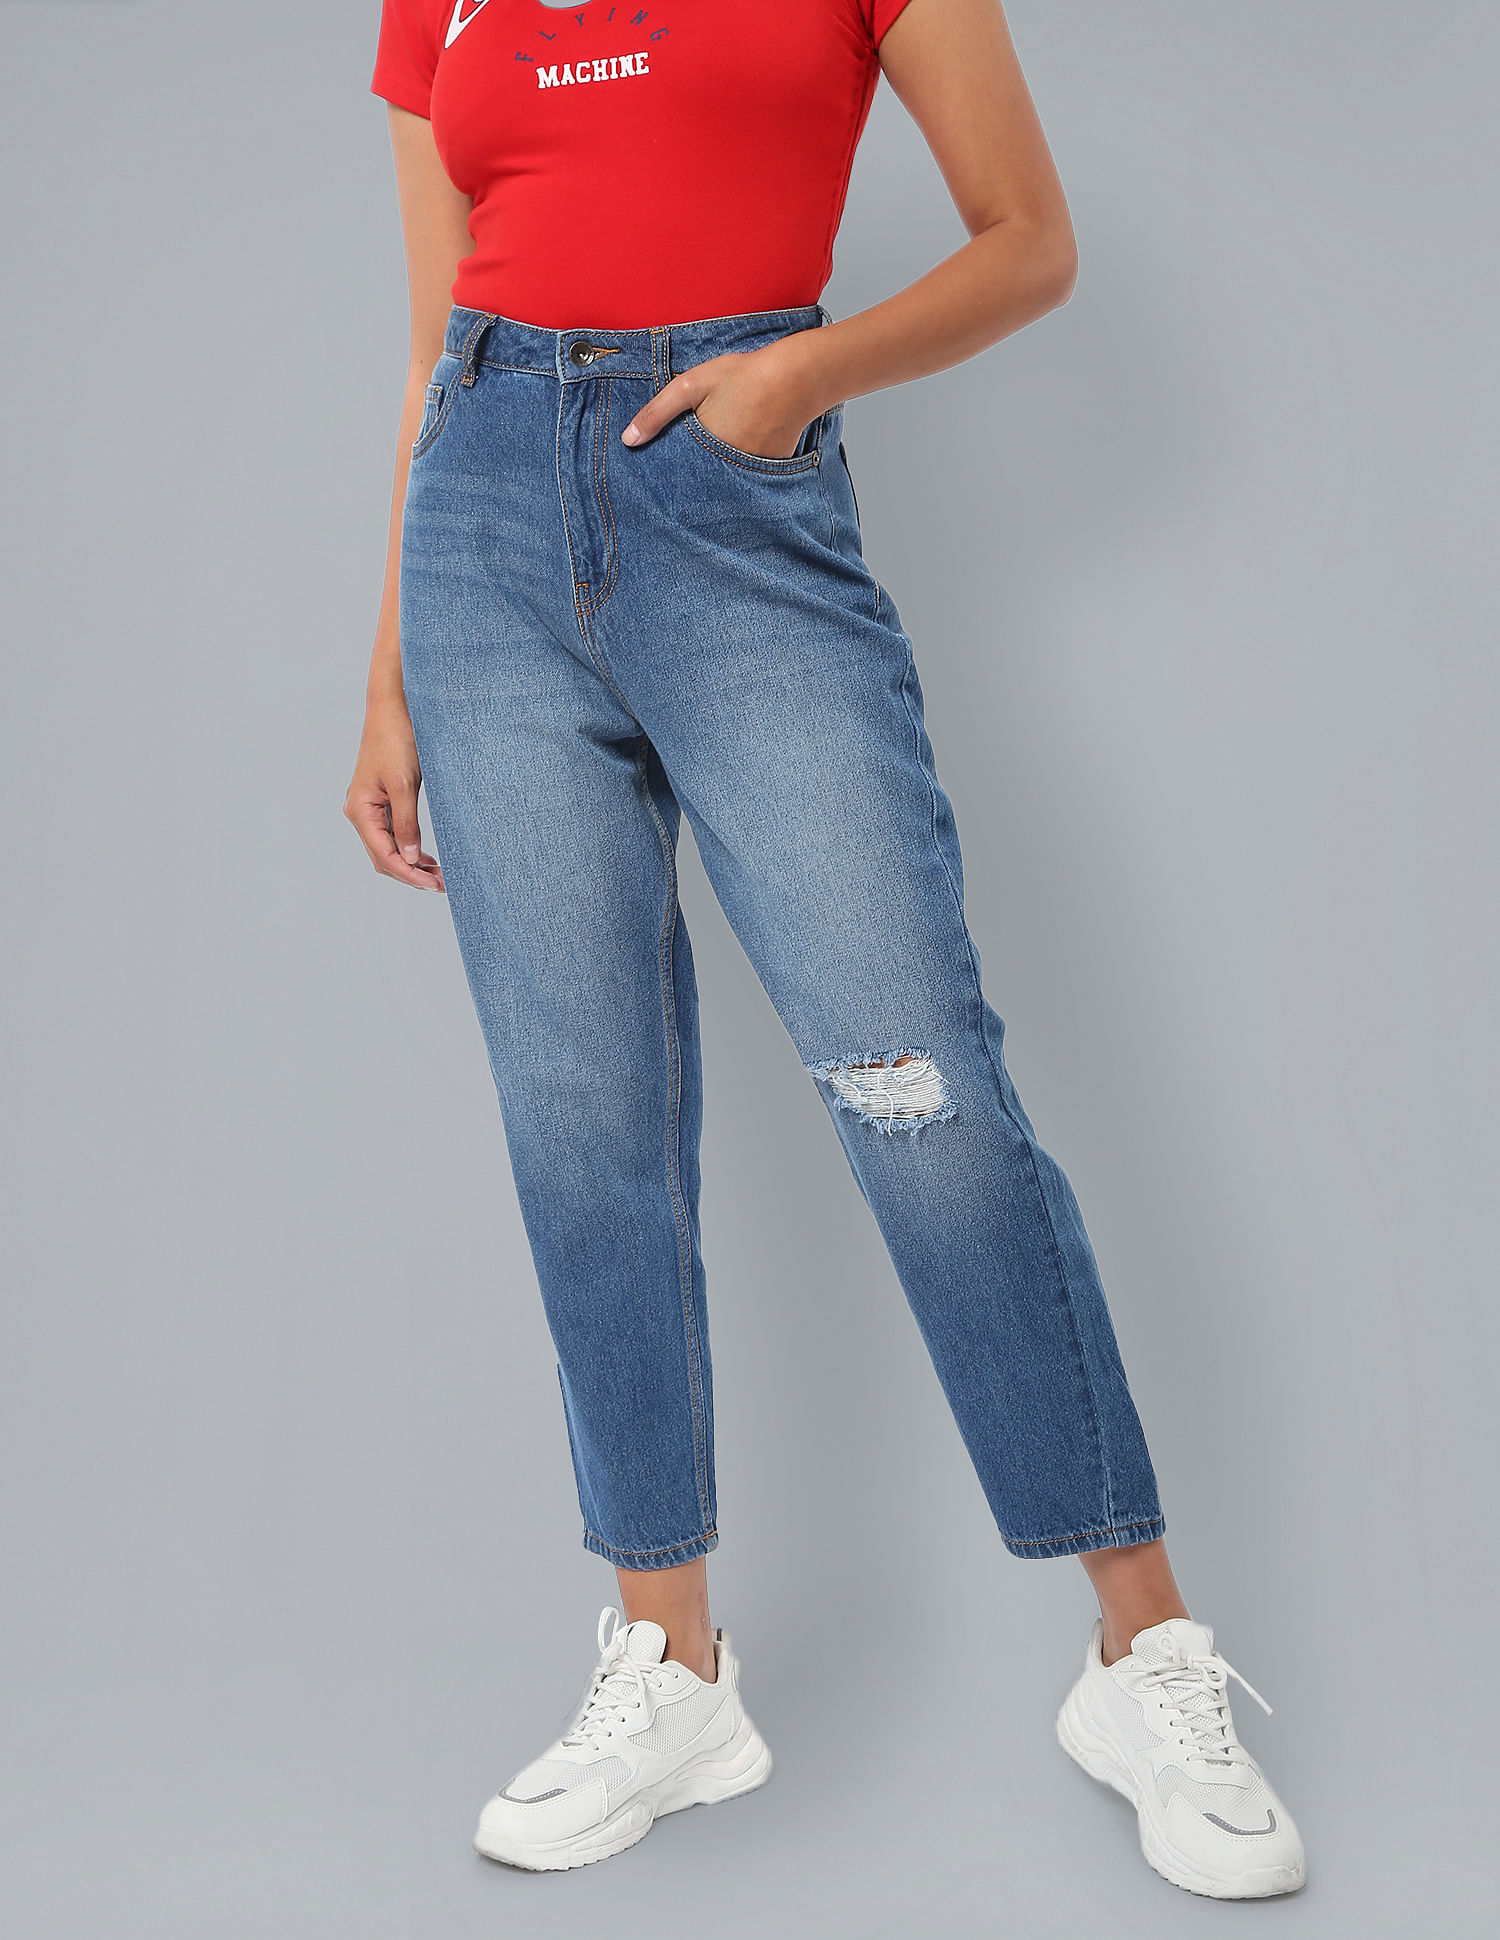 Z1975 MOM FIT JEANS WITH A HIGH WAIST - Light blue | ZARA United States-calidas.vn